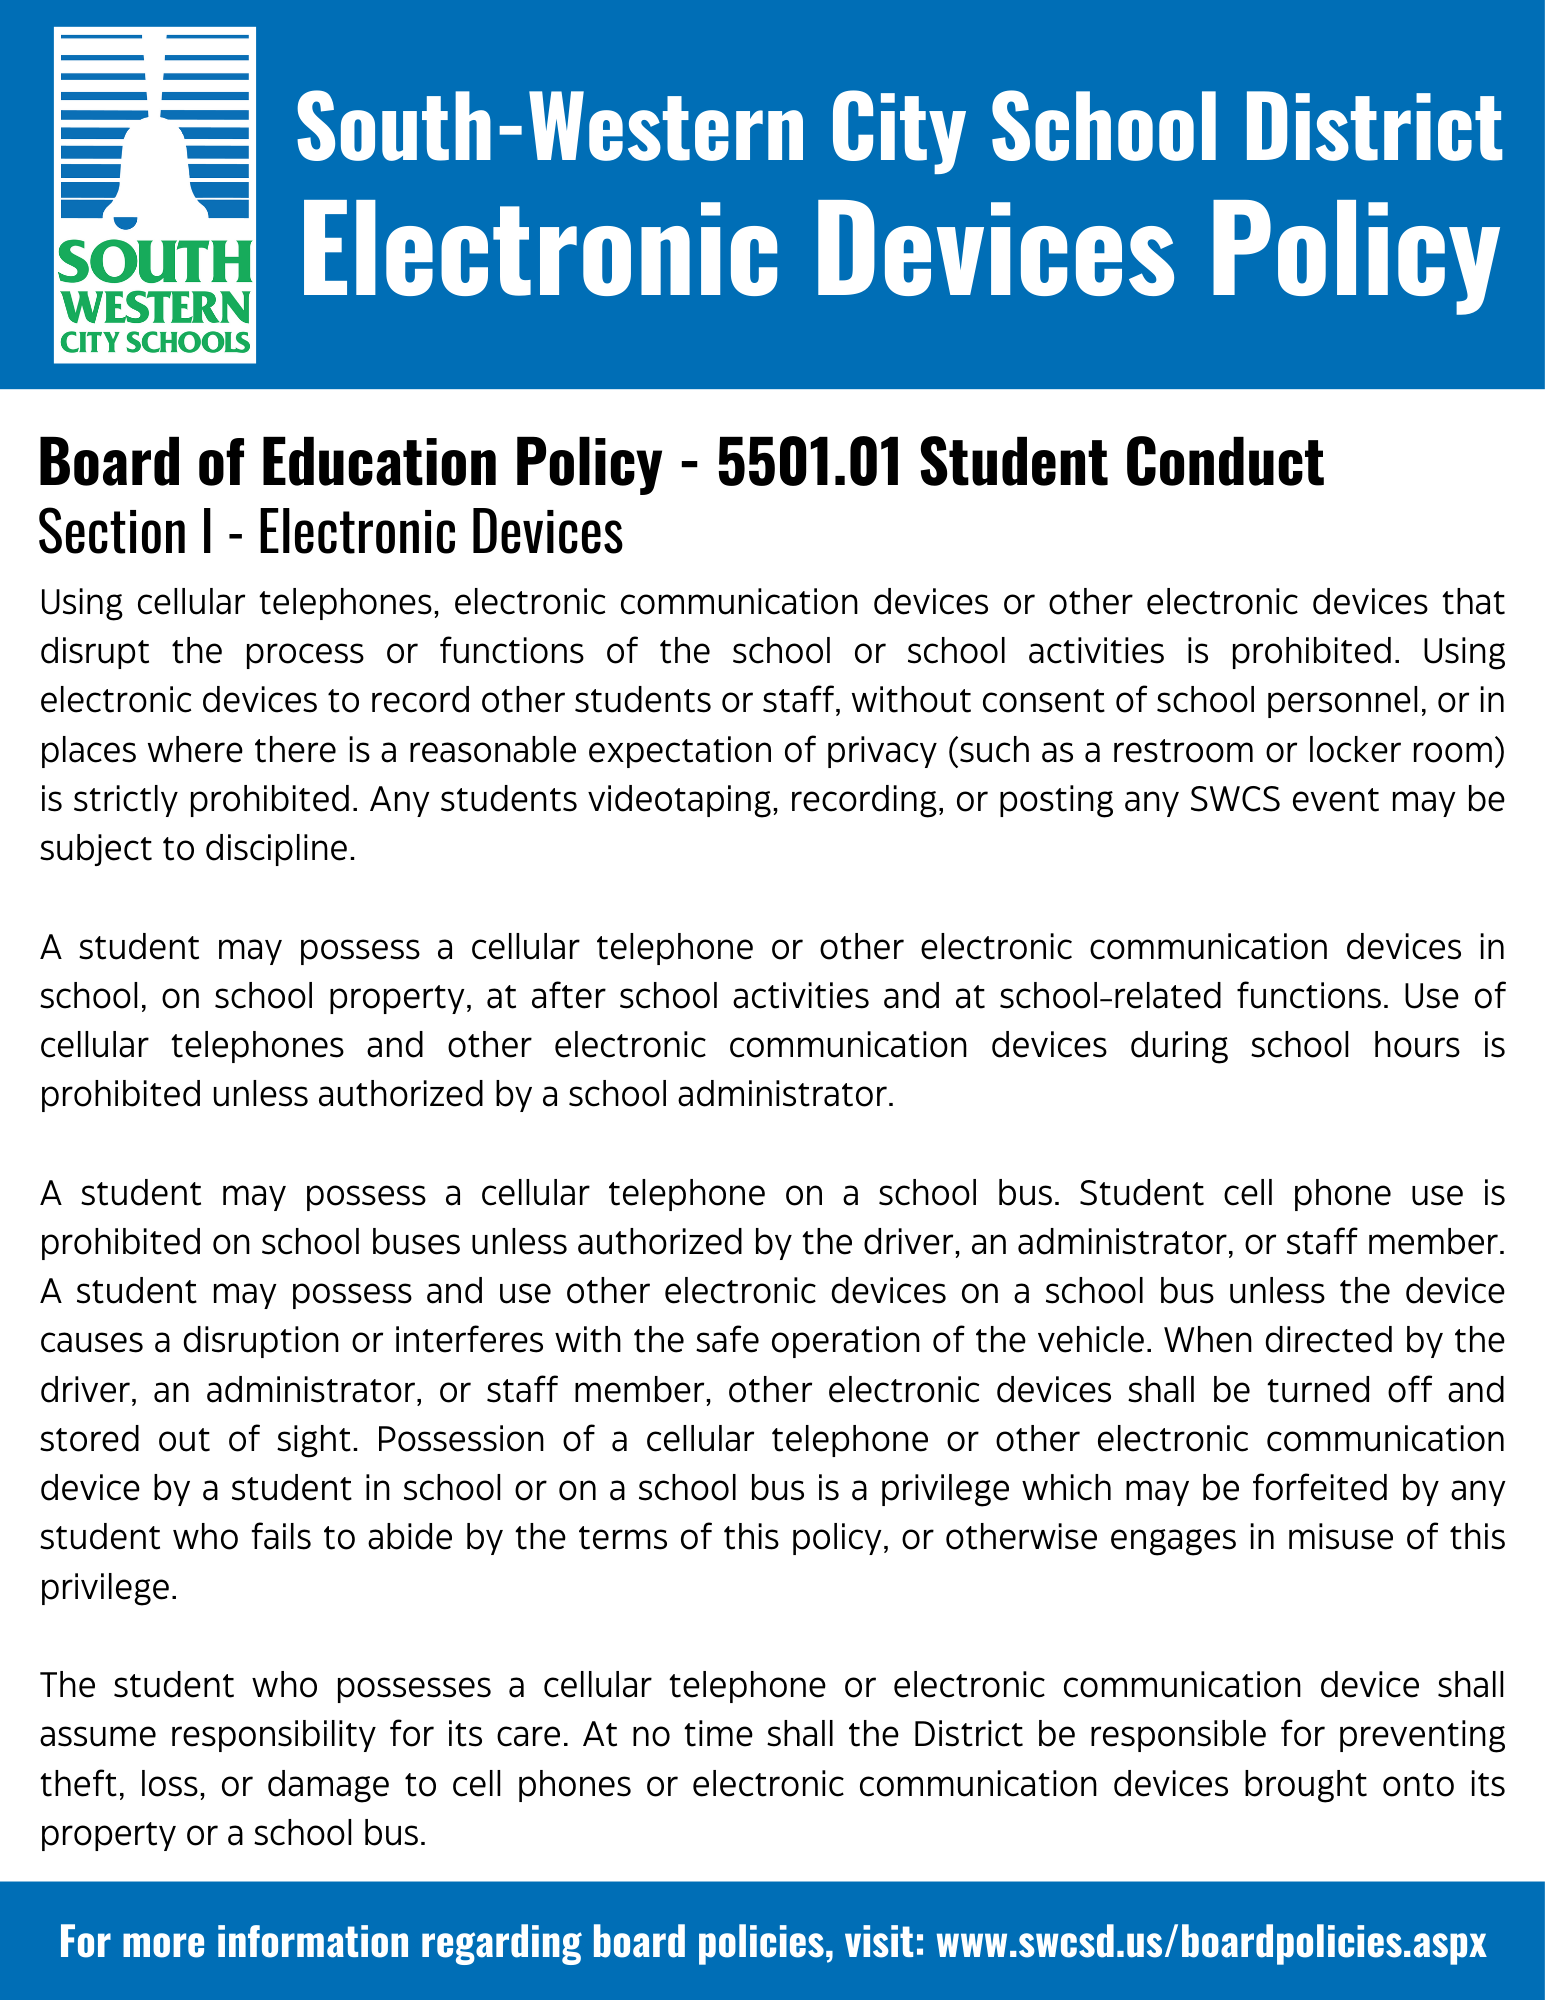 Electronic Device Policy